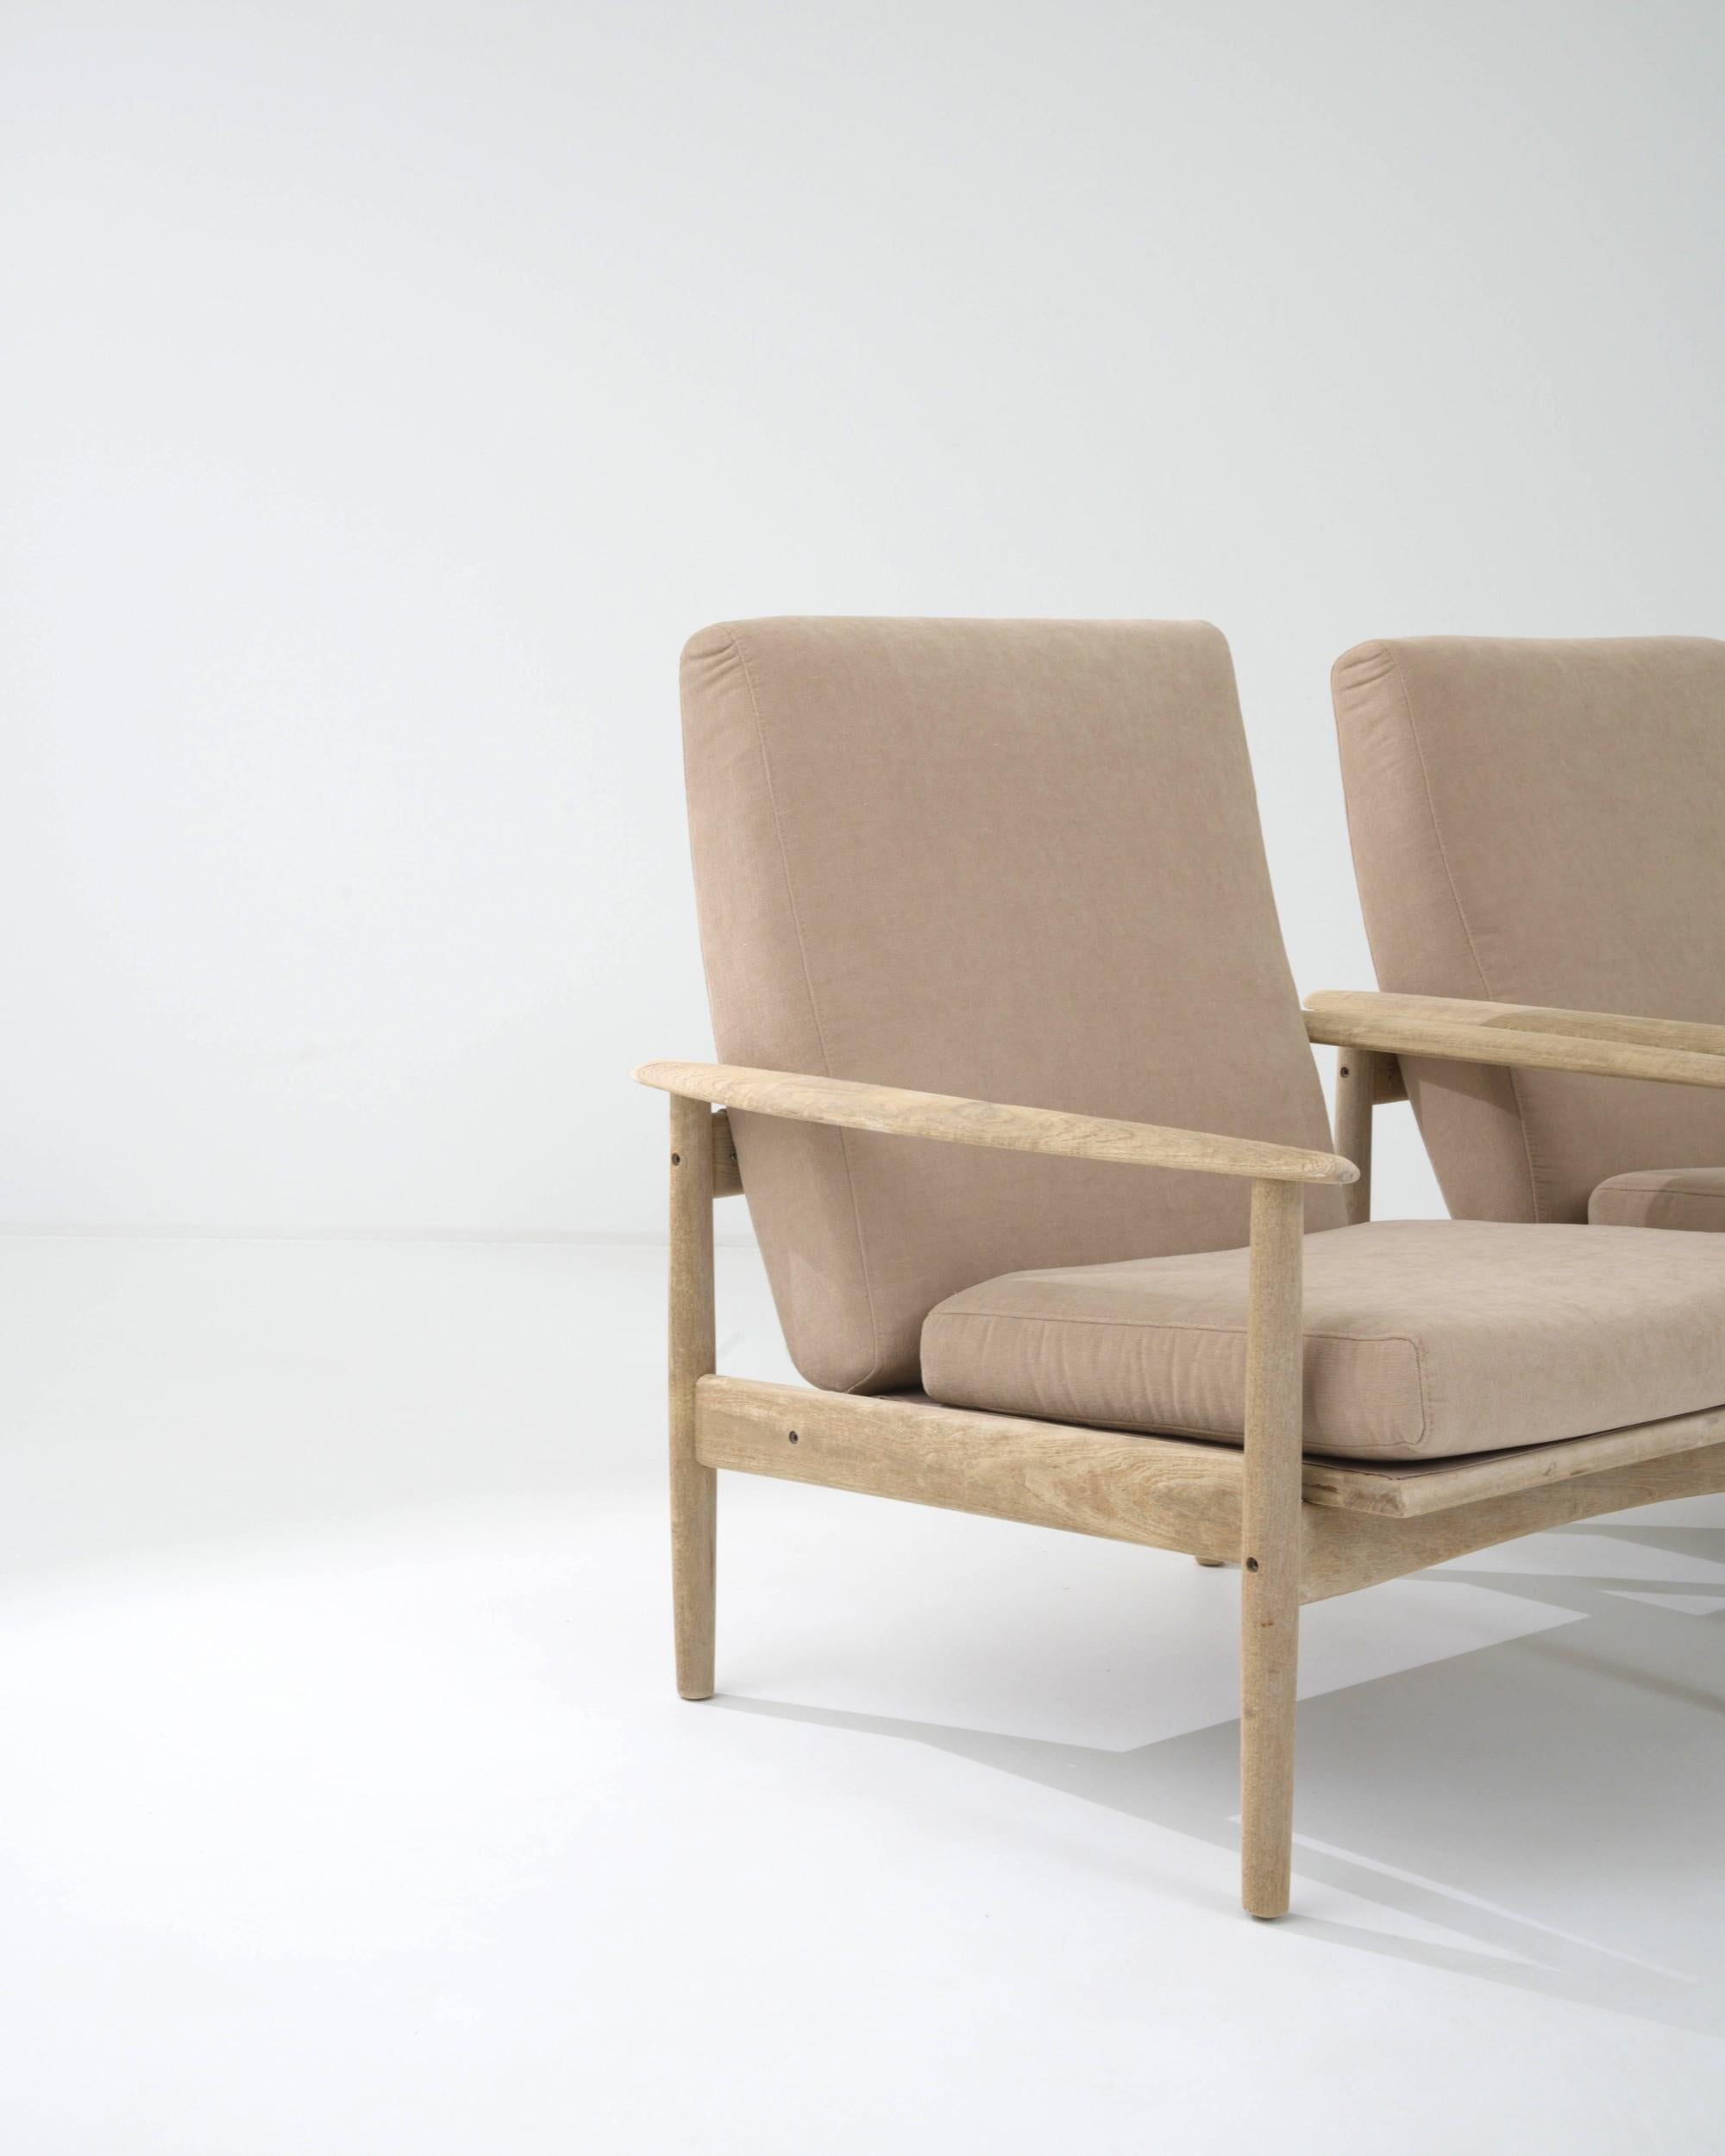 1970s Czech Modernist Upholstered Armchairs, a Pair For Sale 4